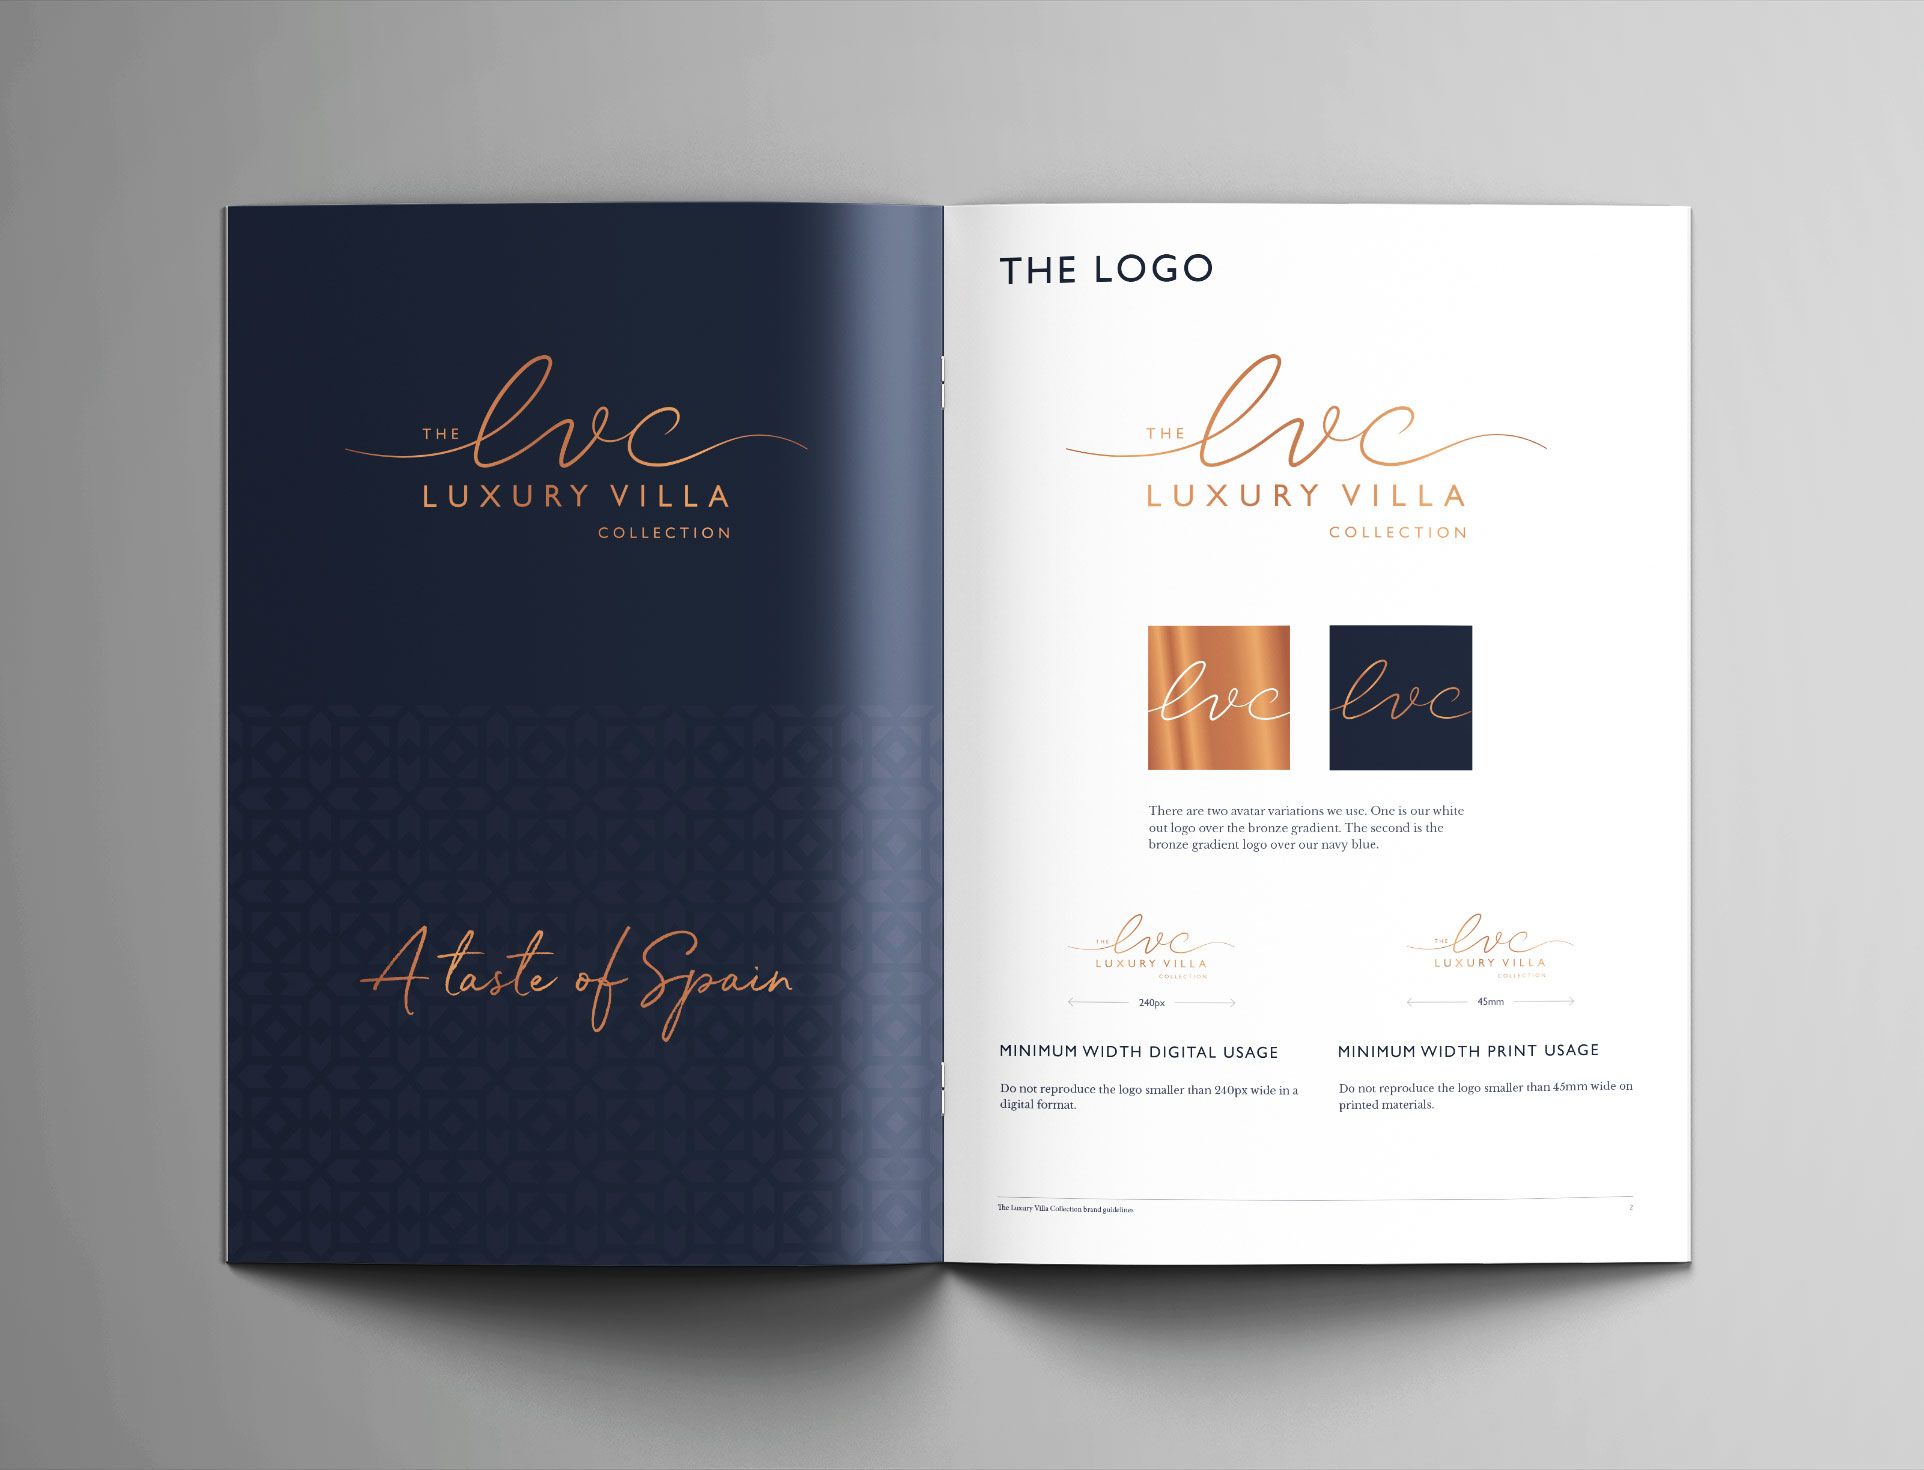 The Luxury Villa Collection brand guidelines